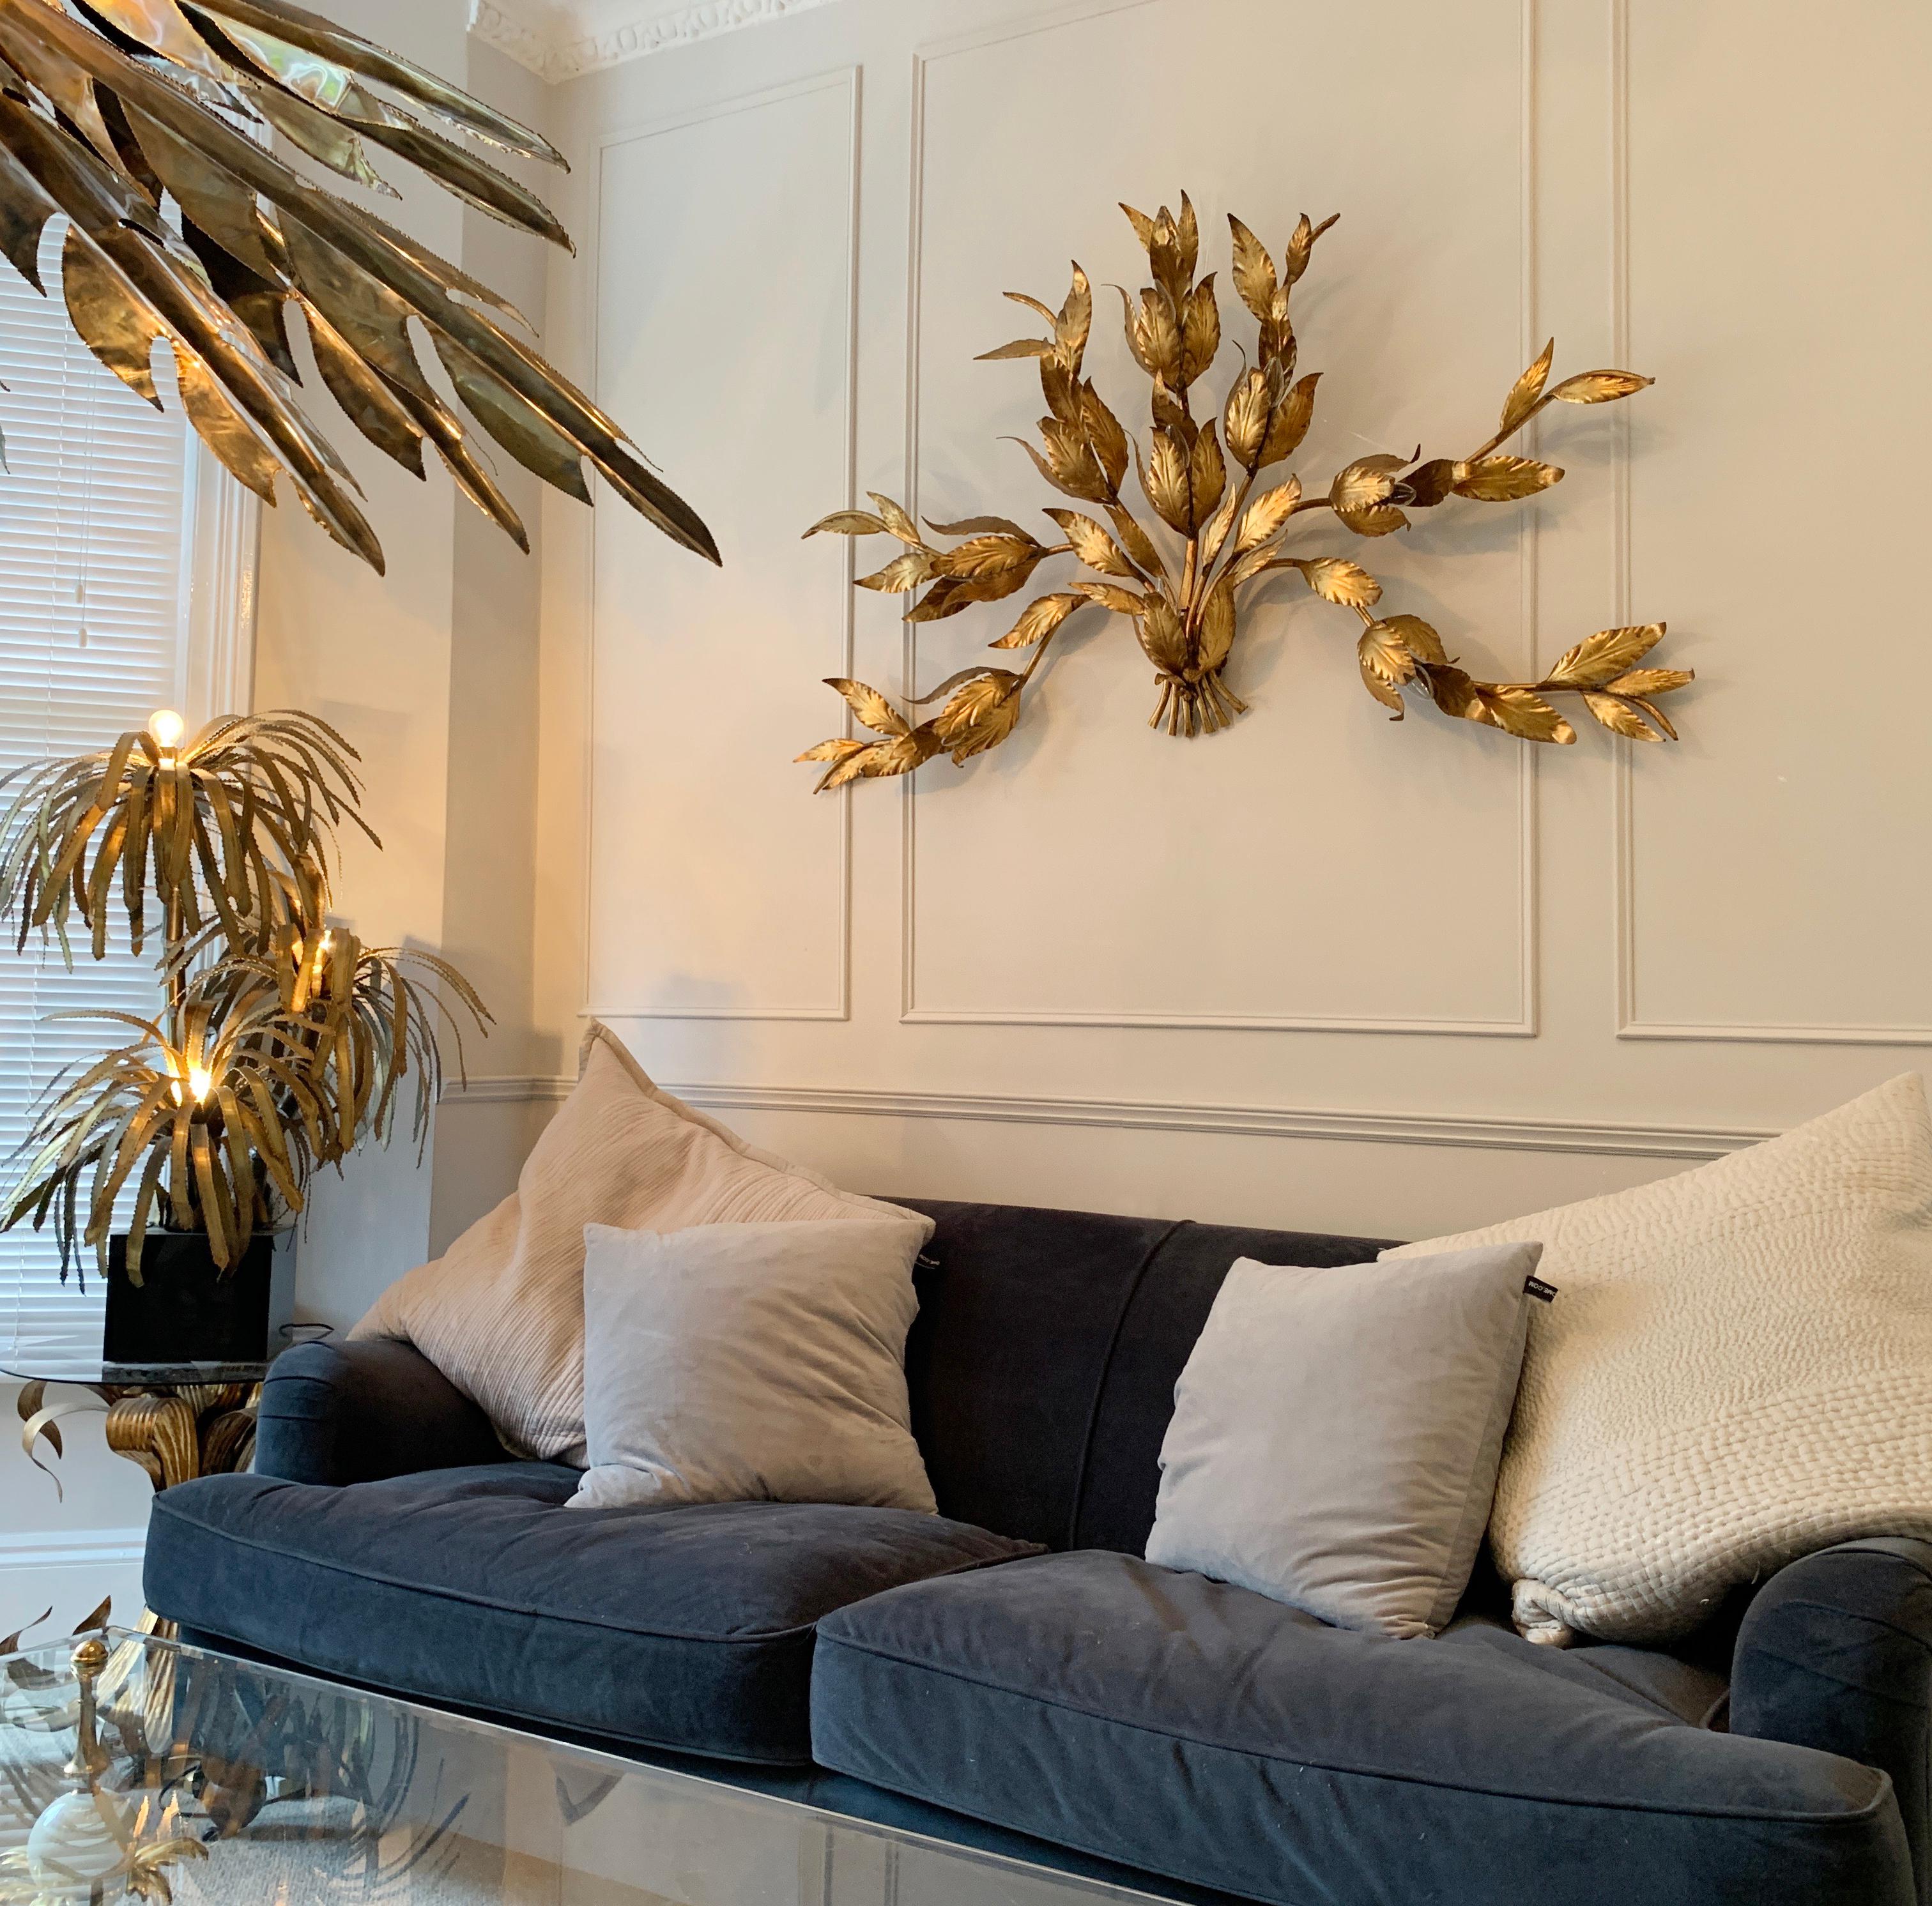 Monumental Hans Kogl leaf wall sconce, 1970S
Hans Kogl, Germany
This very large and beautiful leaf sconce is a real statement piece

There are 7 handcrafted curved gilt stems decorated fully with gilt leaves
Measures: 140 cm width, 80 cm height, 20